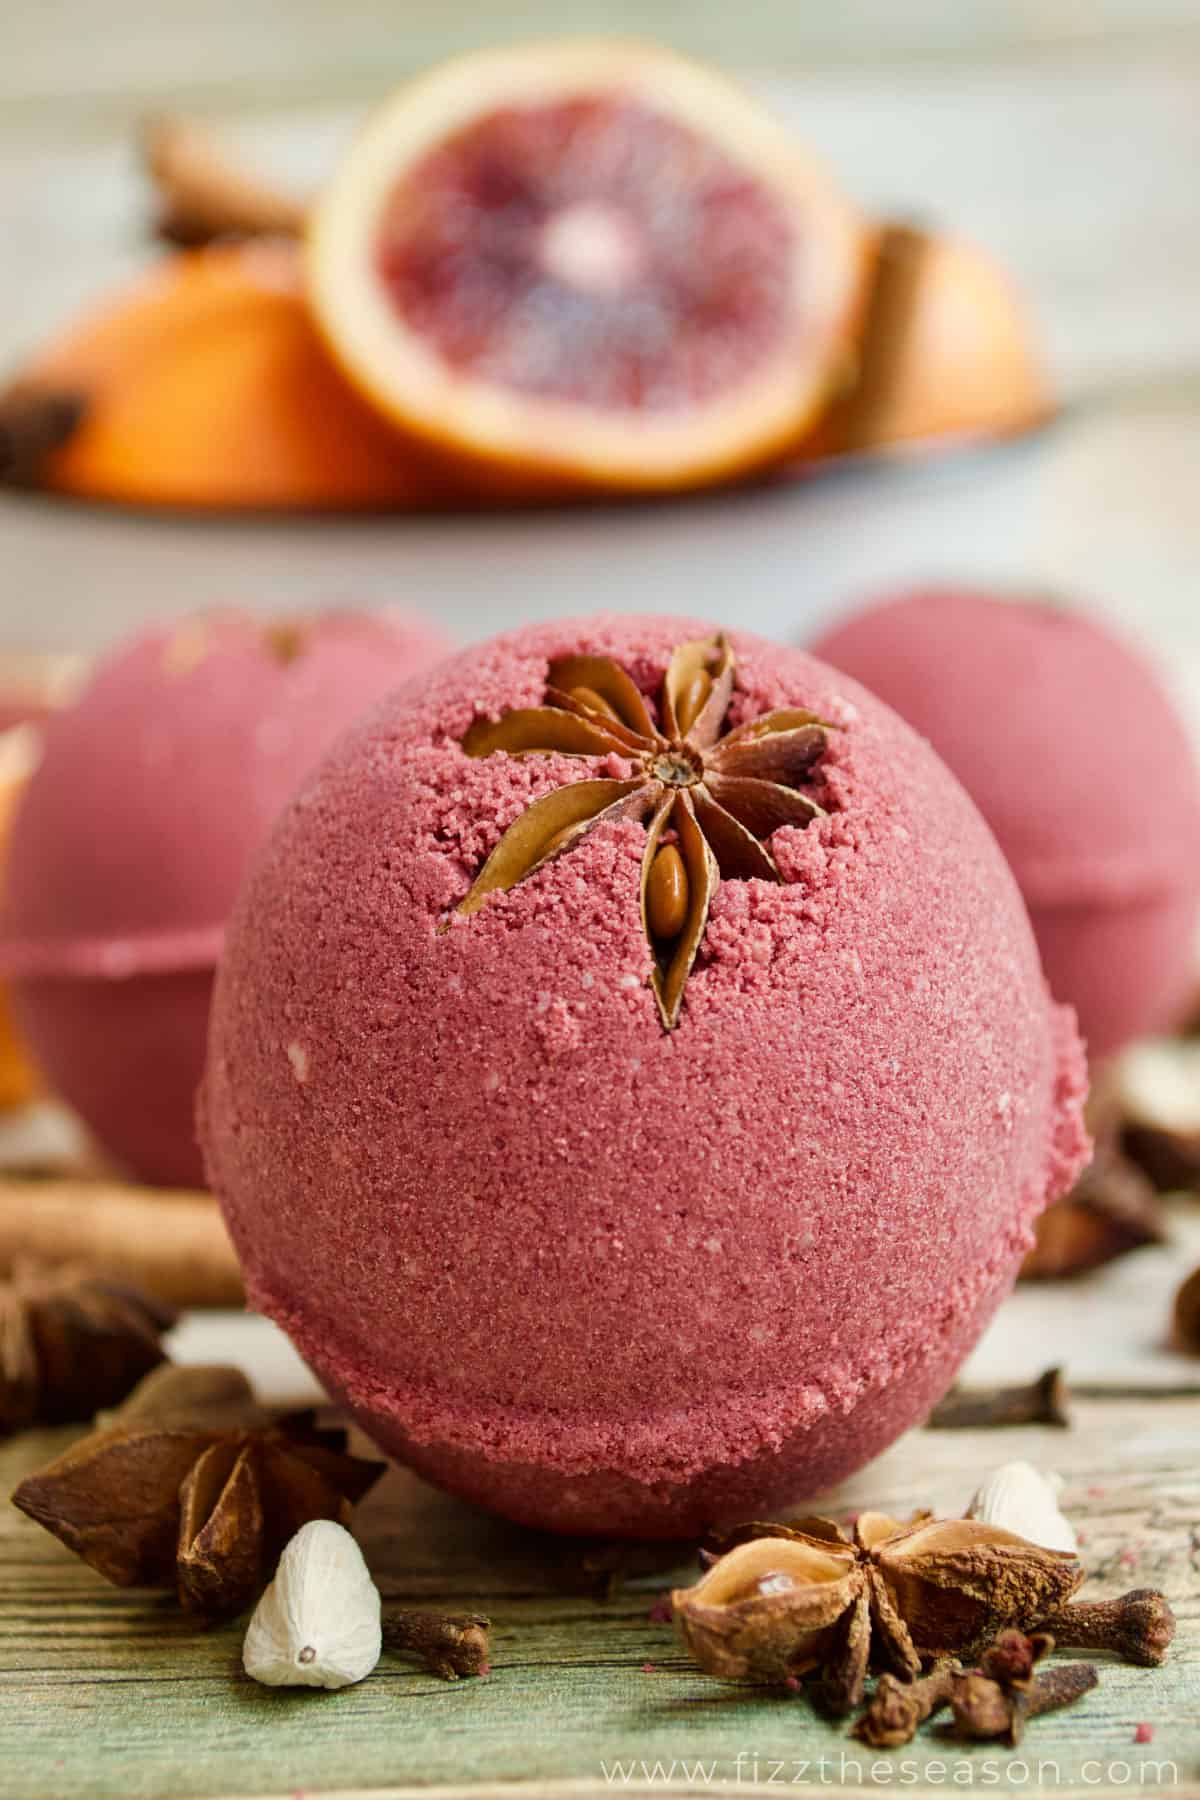 red berry bath bombs with star anise inside